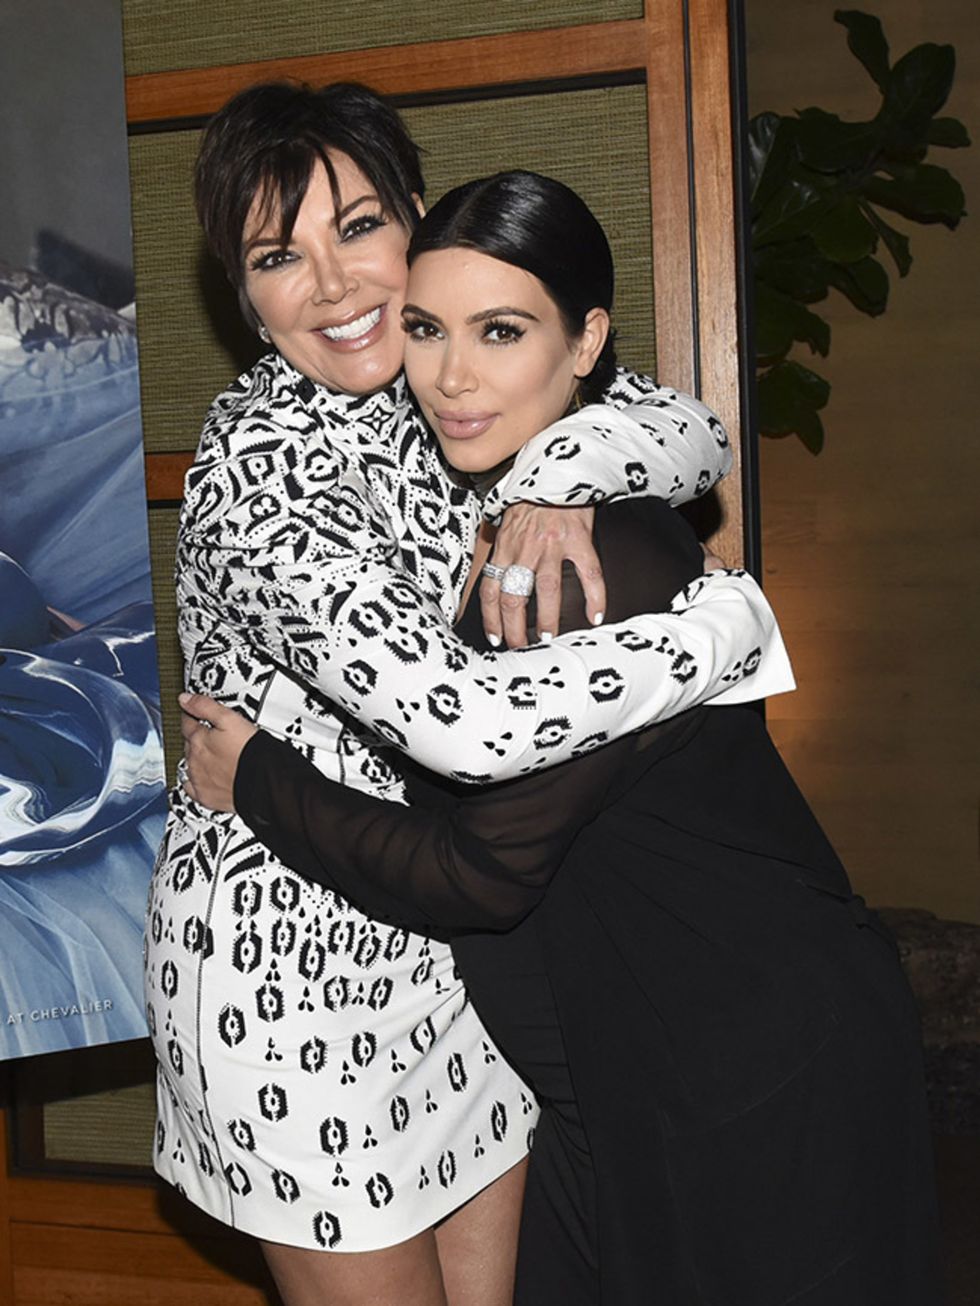 Of course, the woman who pioneered the word momager is going to be included. Kris has said that Kim is her best friend and partner in crime and Kim has said she owes everything she is to Kris.